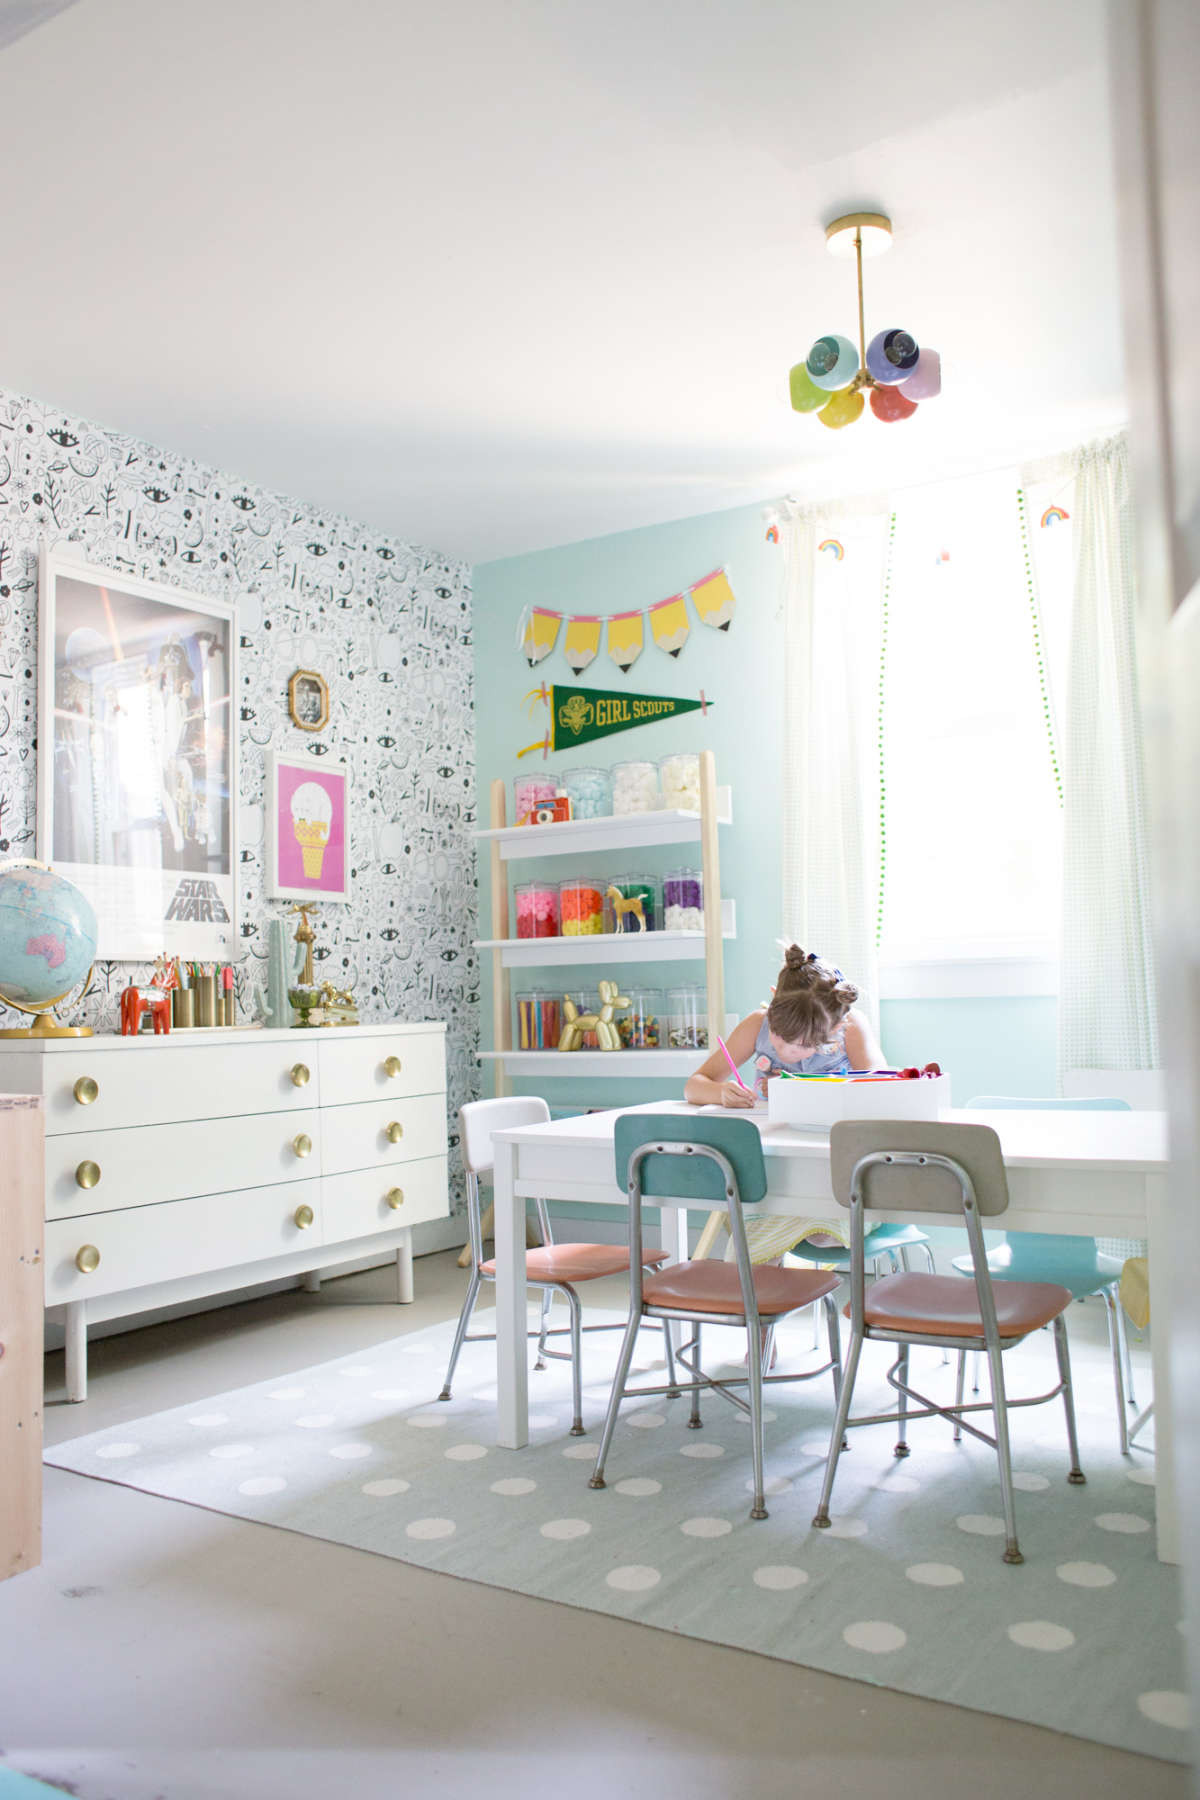 Kids Craft Room Ideas
 craft room ideas for kids Lay Baby Lay Lay Baby Lay